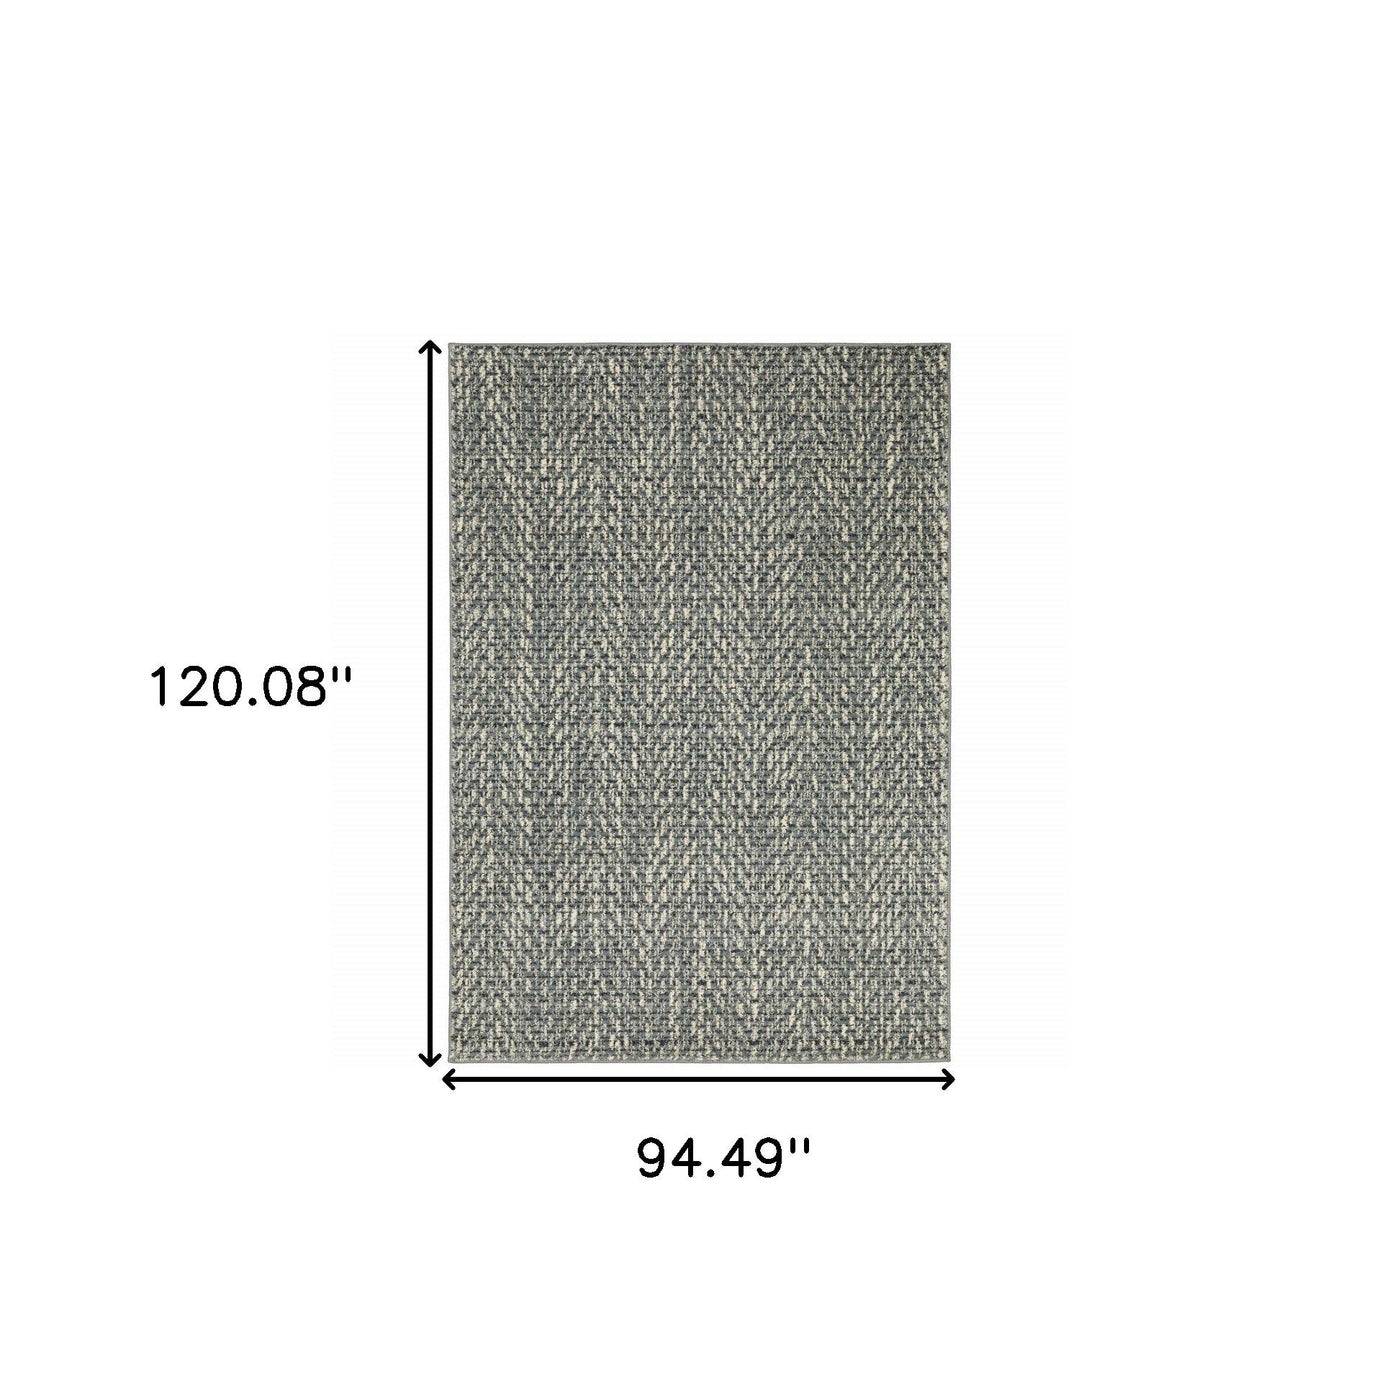 8’ X 10’ Blue Ivory Grey And Light Blue Geometric Power Loom Stain Resistant Area Rug - Area Rugs